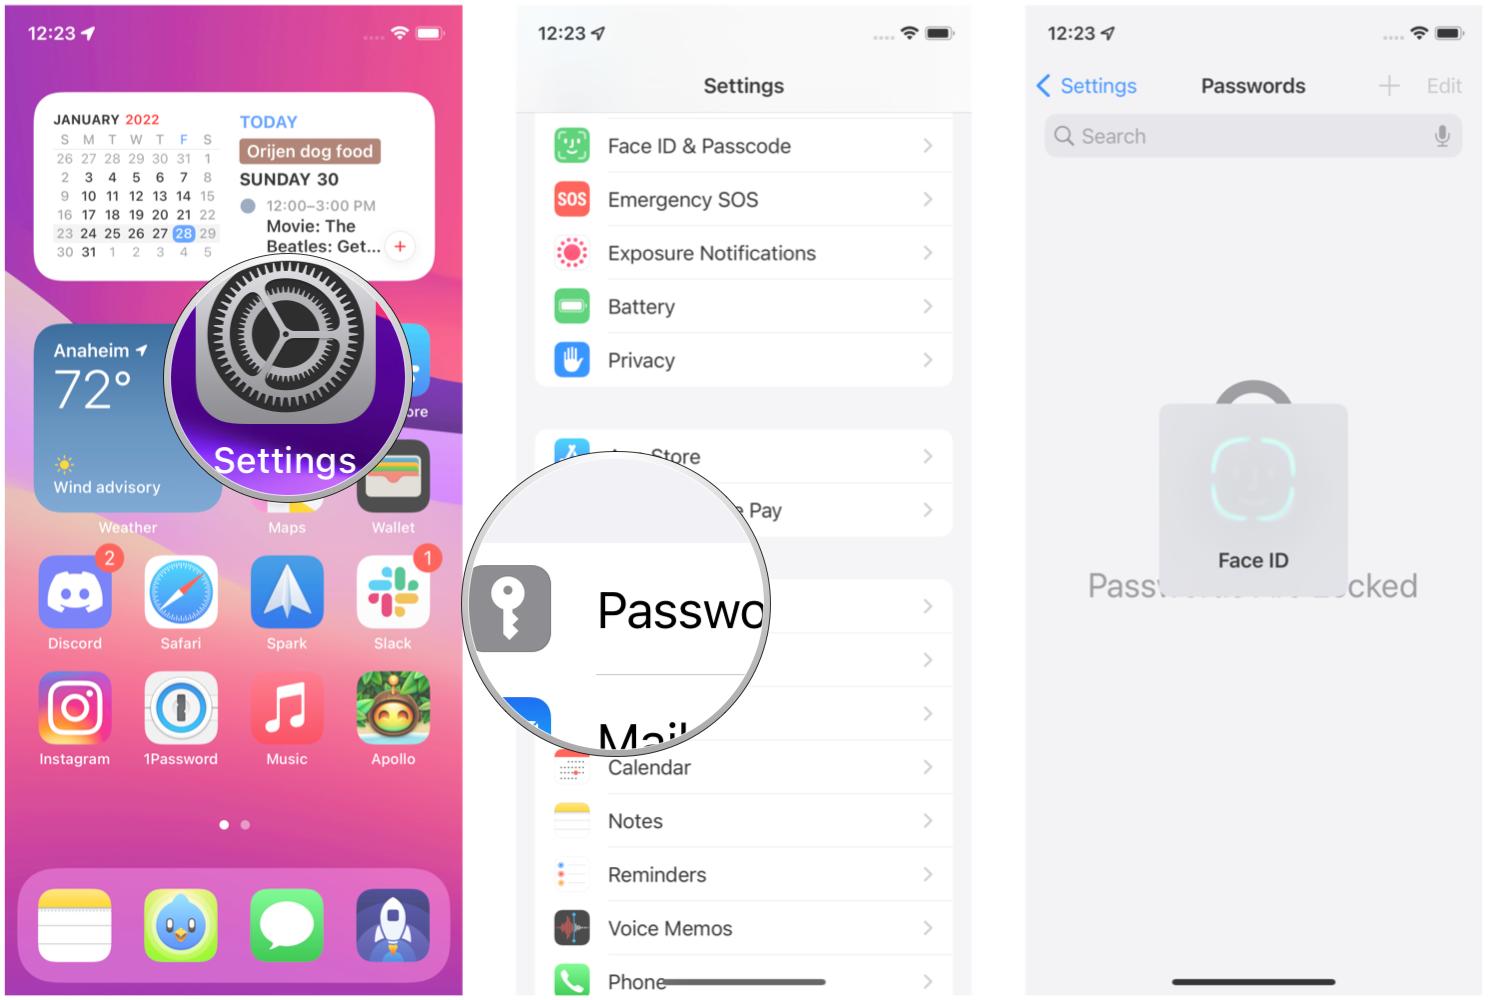 Add a note to a password in iOS 15.4 on iPhone by showing: Launch Settings, tap Passwords, authenticate